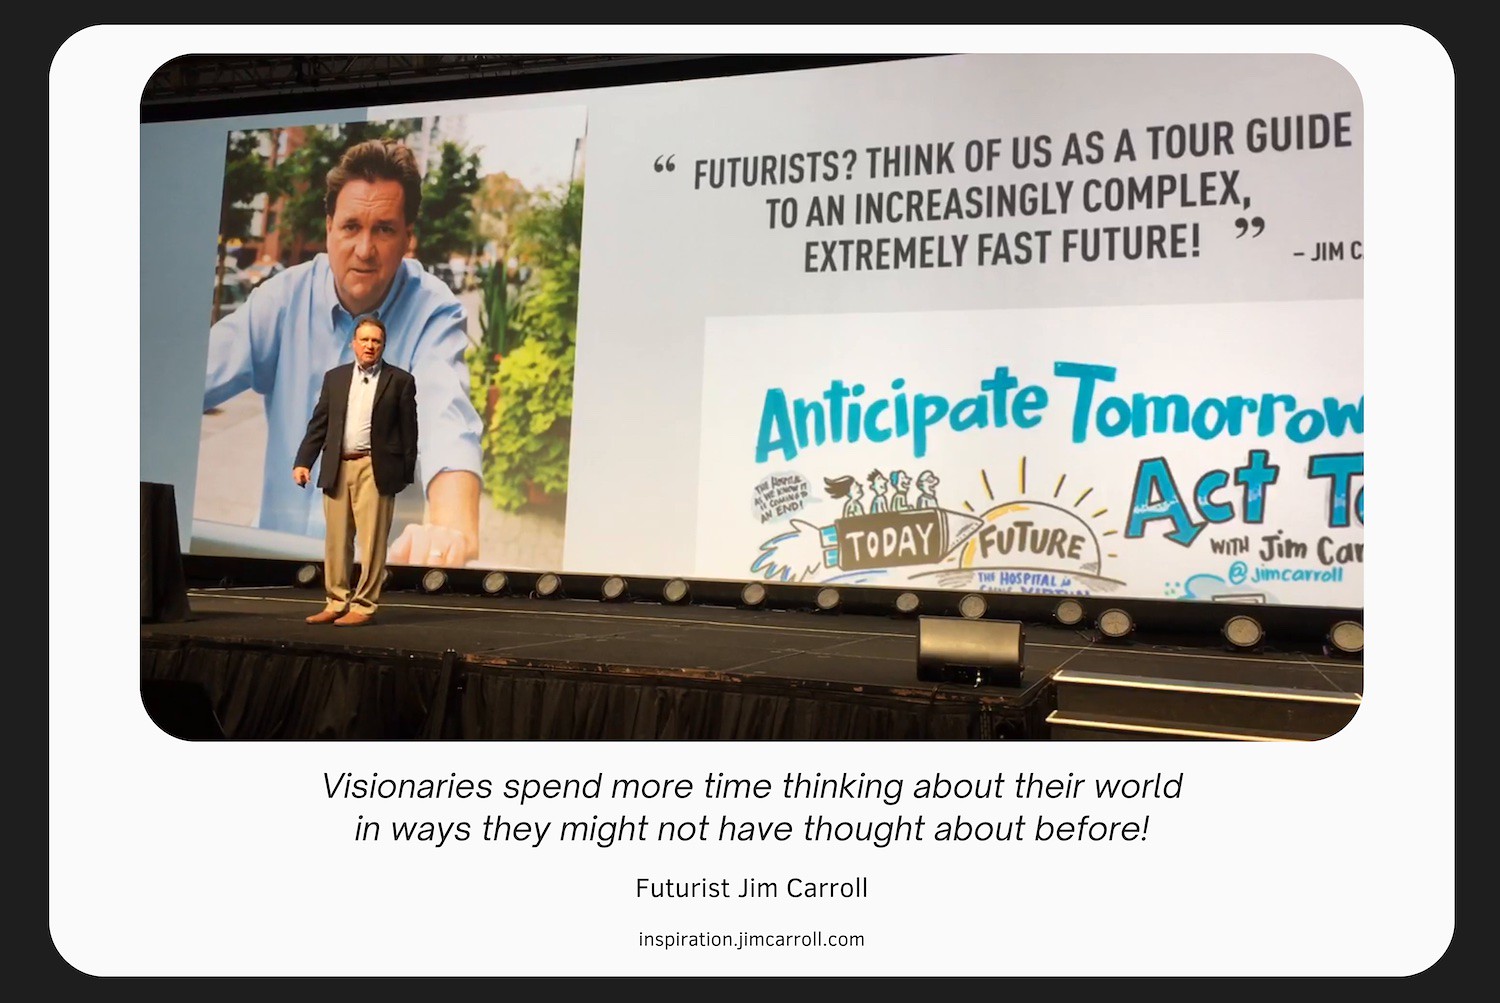 "Visionaries spend more time thinking about their world in ways they might not have thought about before!" - Futurist Jim Carroll